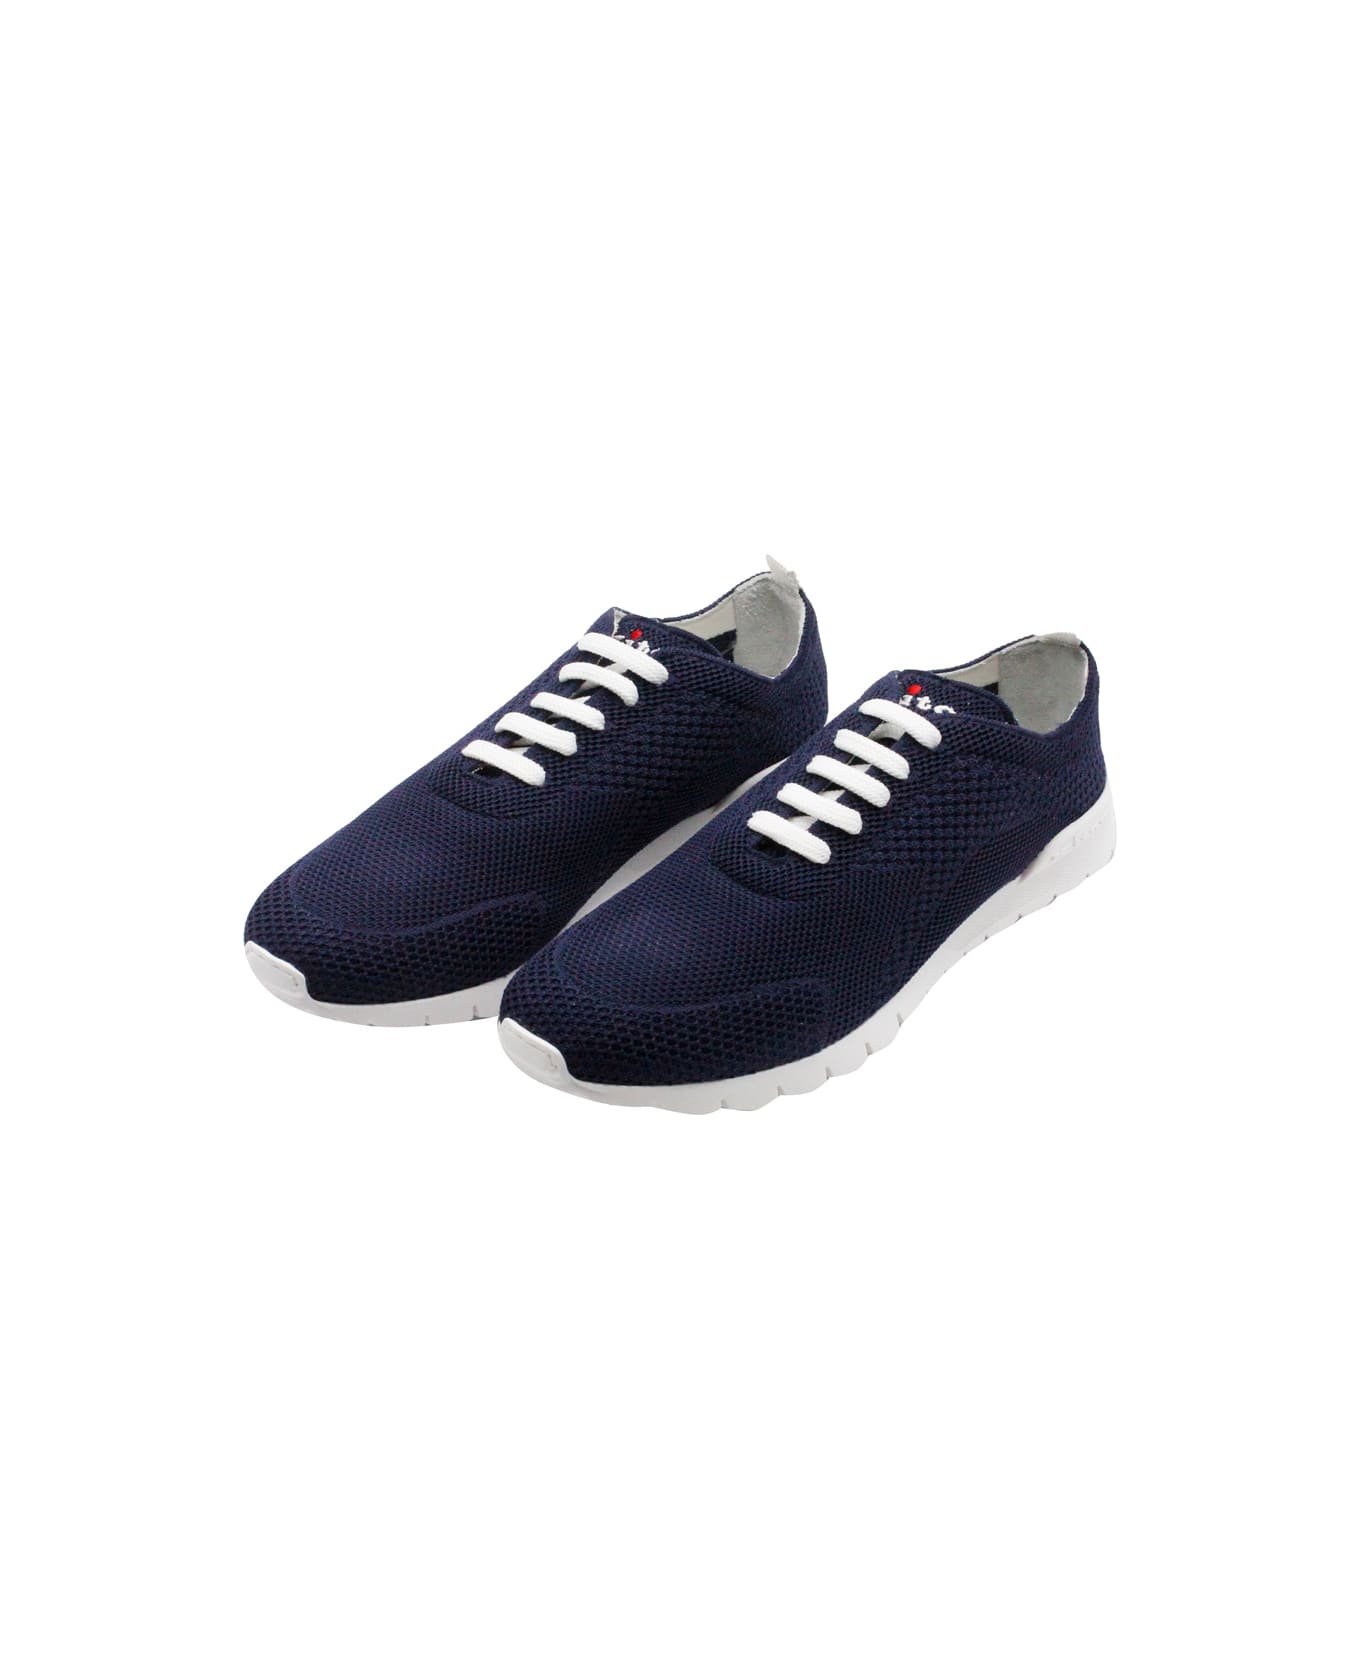 Kiton Sneaker Shoe Made Of Knit Fabric. The Bottom, With A White Sole, Is Flexible And Extra Light; The Elastic Tongue Ensures Greater Comfort. Logo - Blu